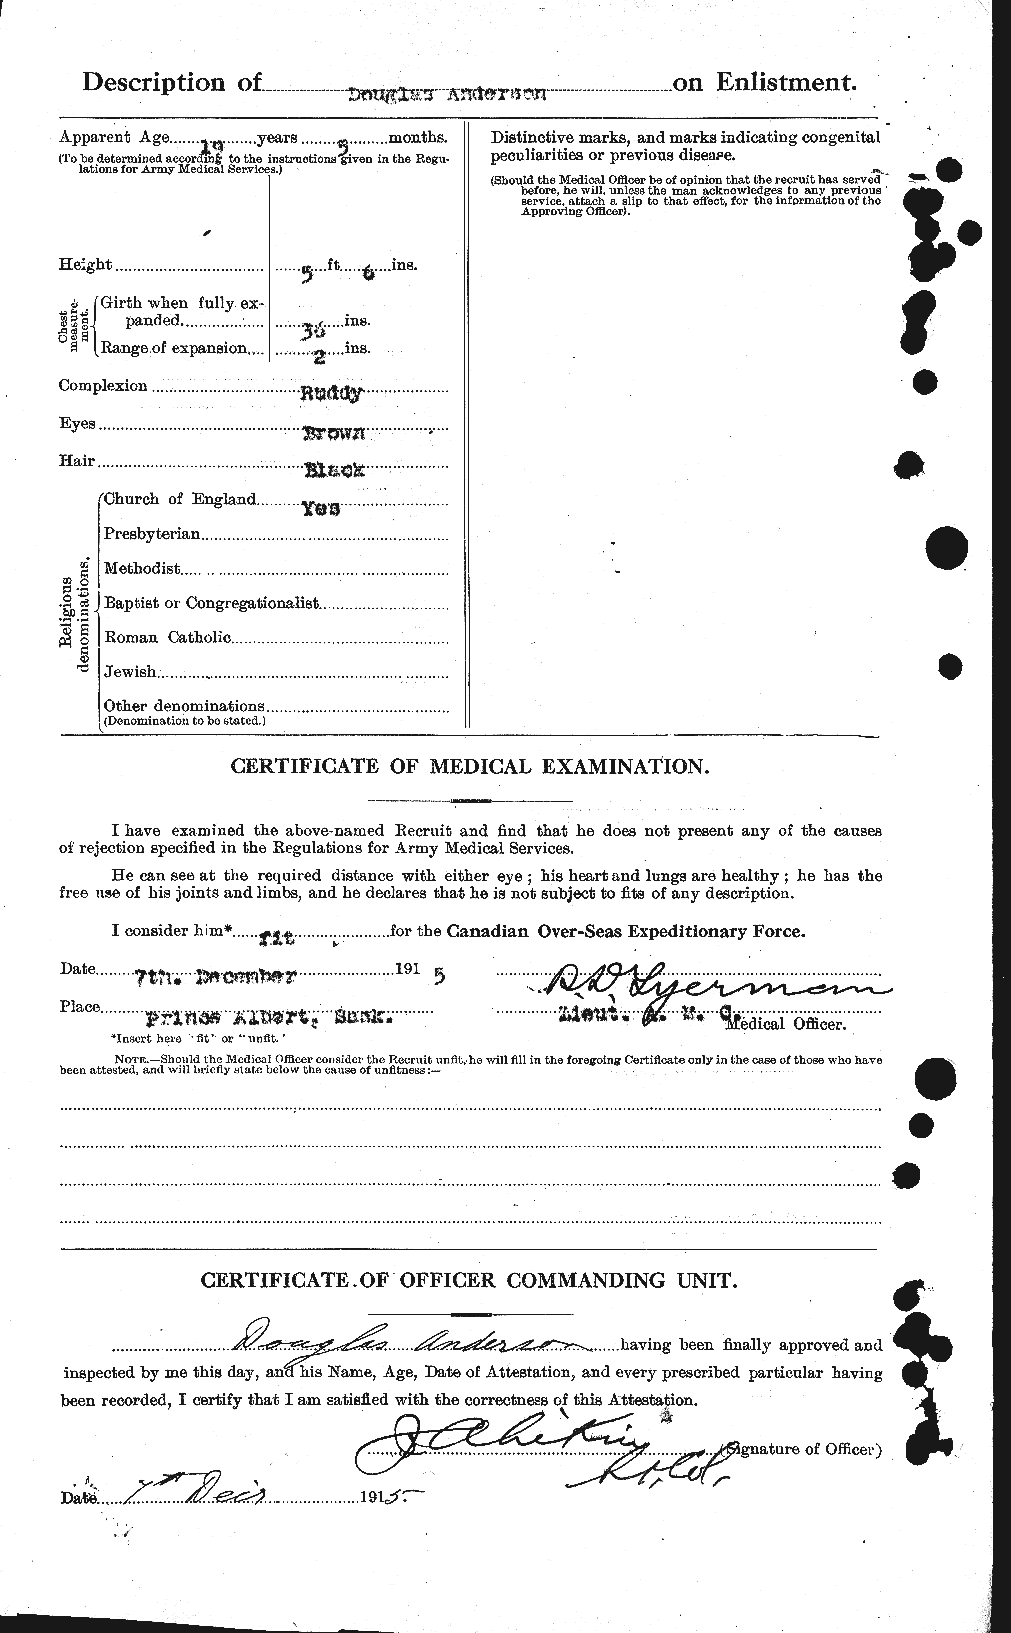 Personnel Records of the First World War - CEF 209976b